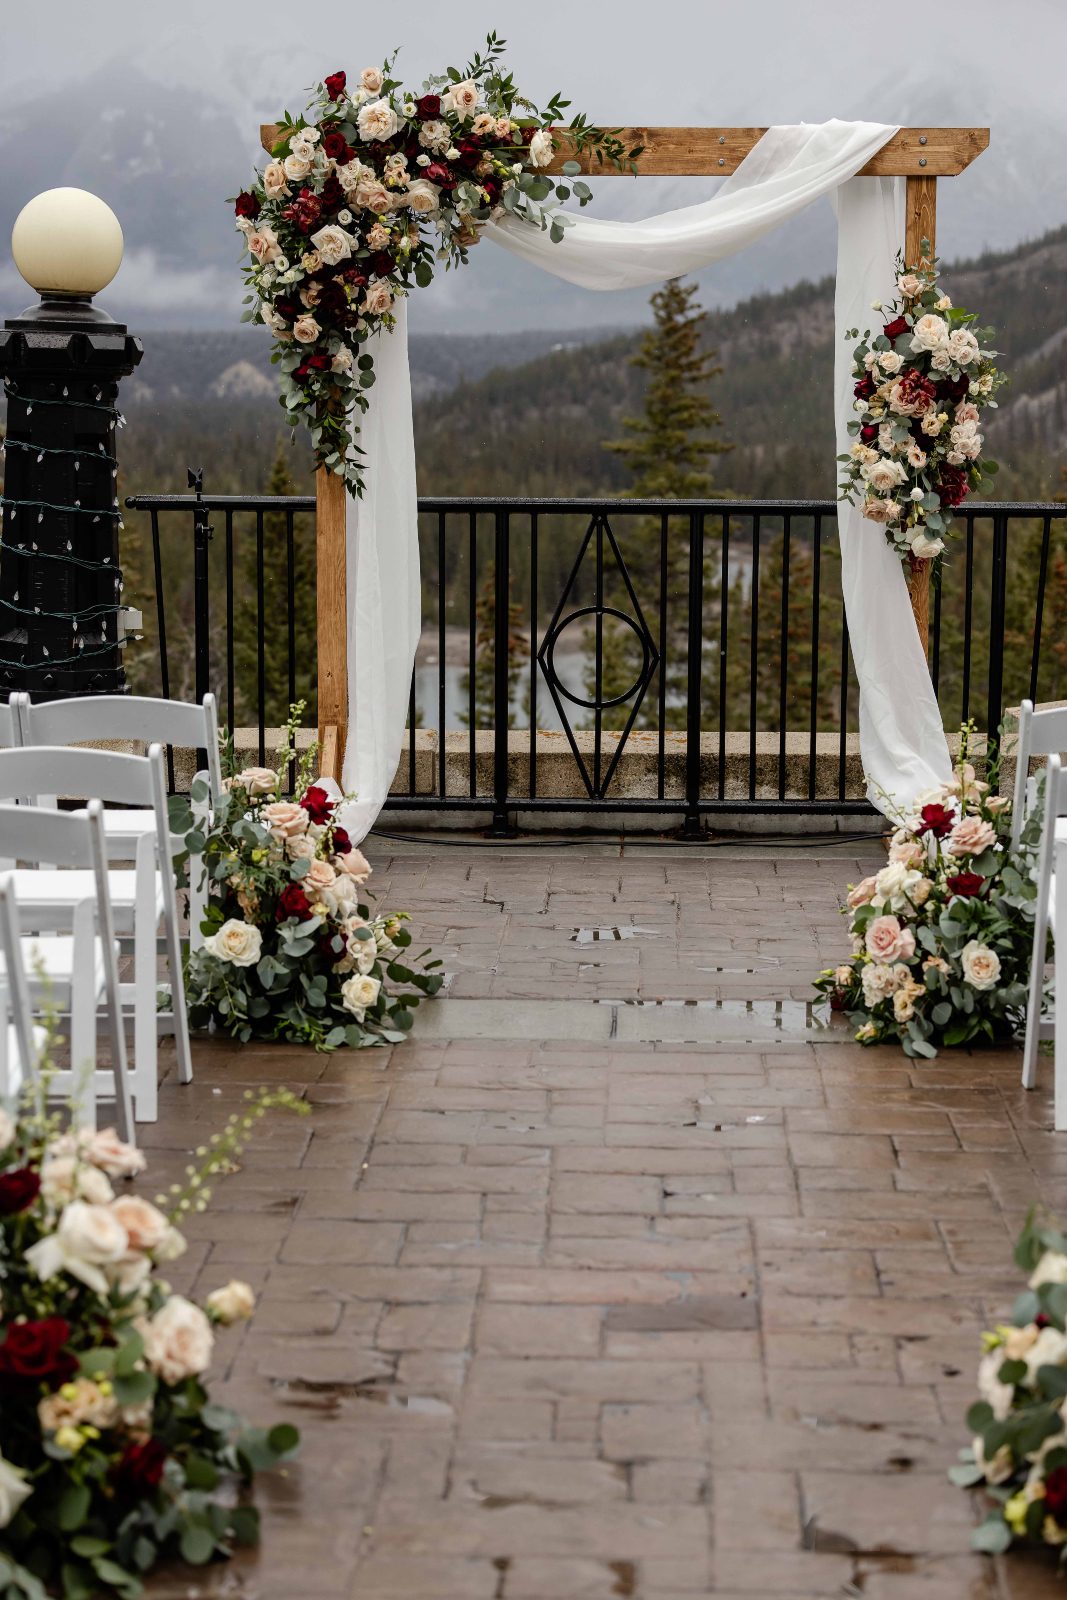 A shot of the ceremony set up with a beautiful asymmetrical archway and aisle arrangements with a mountain view in the background